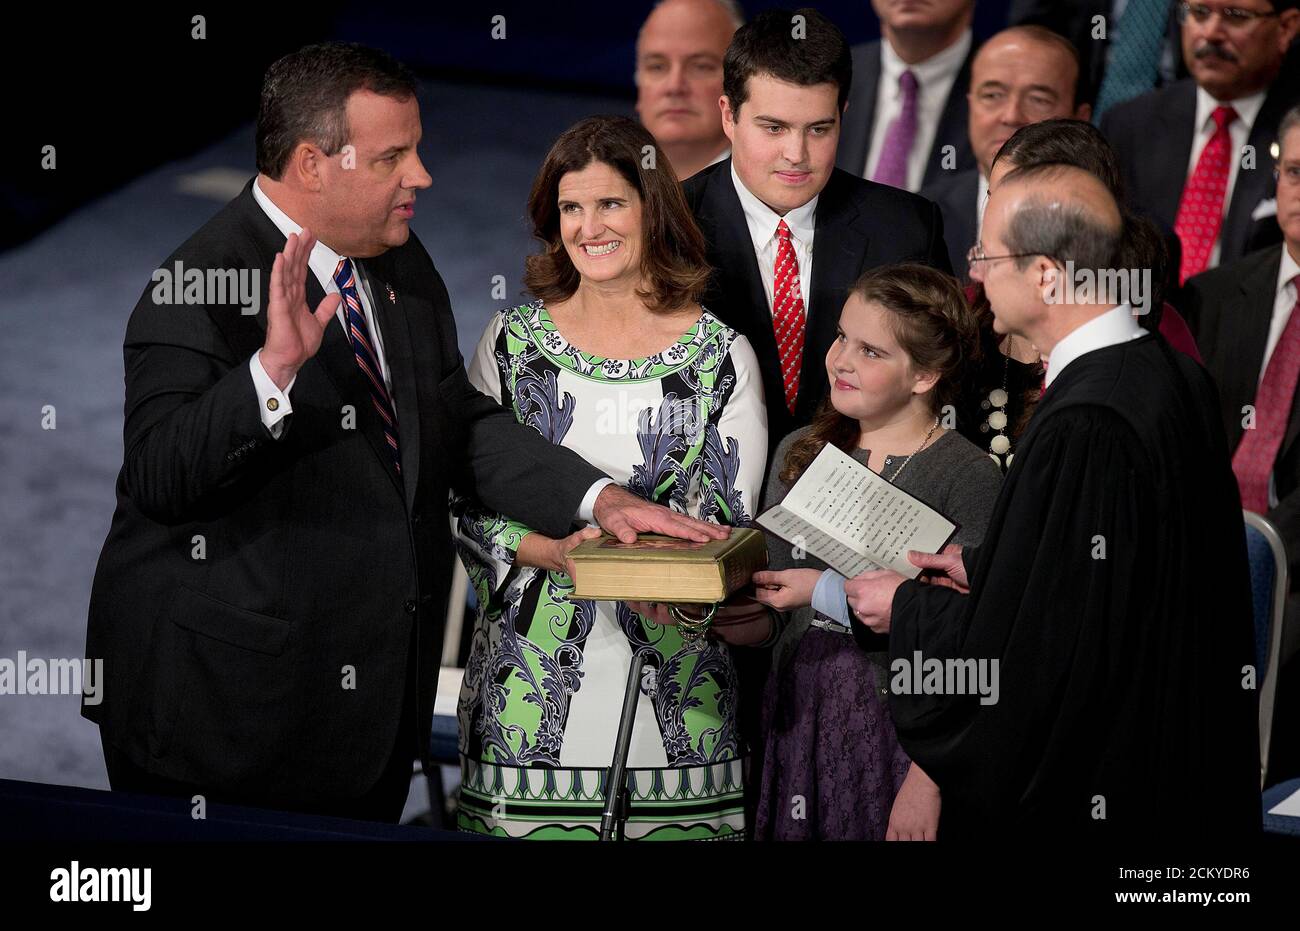 Governor Chris Christie holds his hand aloft as he is sworn in for his second term at the War Memorial Theatre in Trenton, New Jersey January 21, 2014. Christie, a Republican Party star enmeshed in scandal after re-election in November, will return to the themes of small government and bipartisan cooperation when he is sworn in for a second term on Tuesday.      REUTERS/Carlo Allegri (UNITED STATES - Tags: POLITICS TPX IMAGES OF THE DAY) Stock Photo